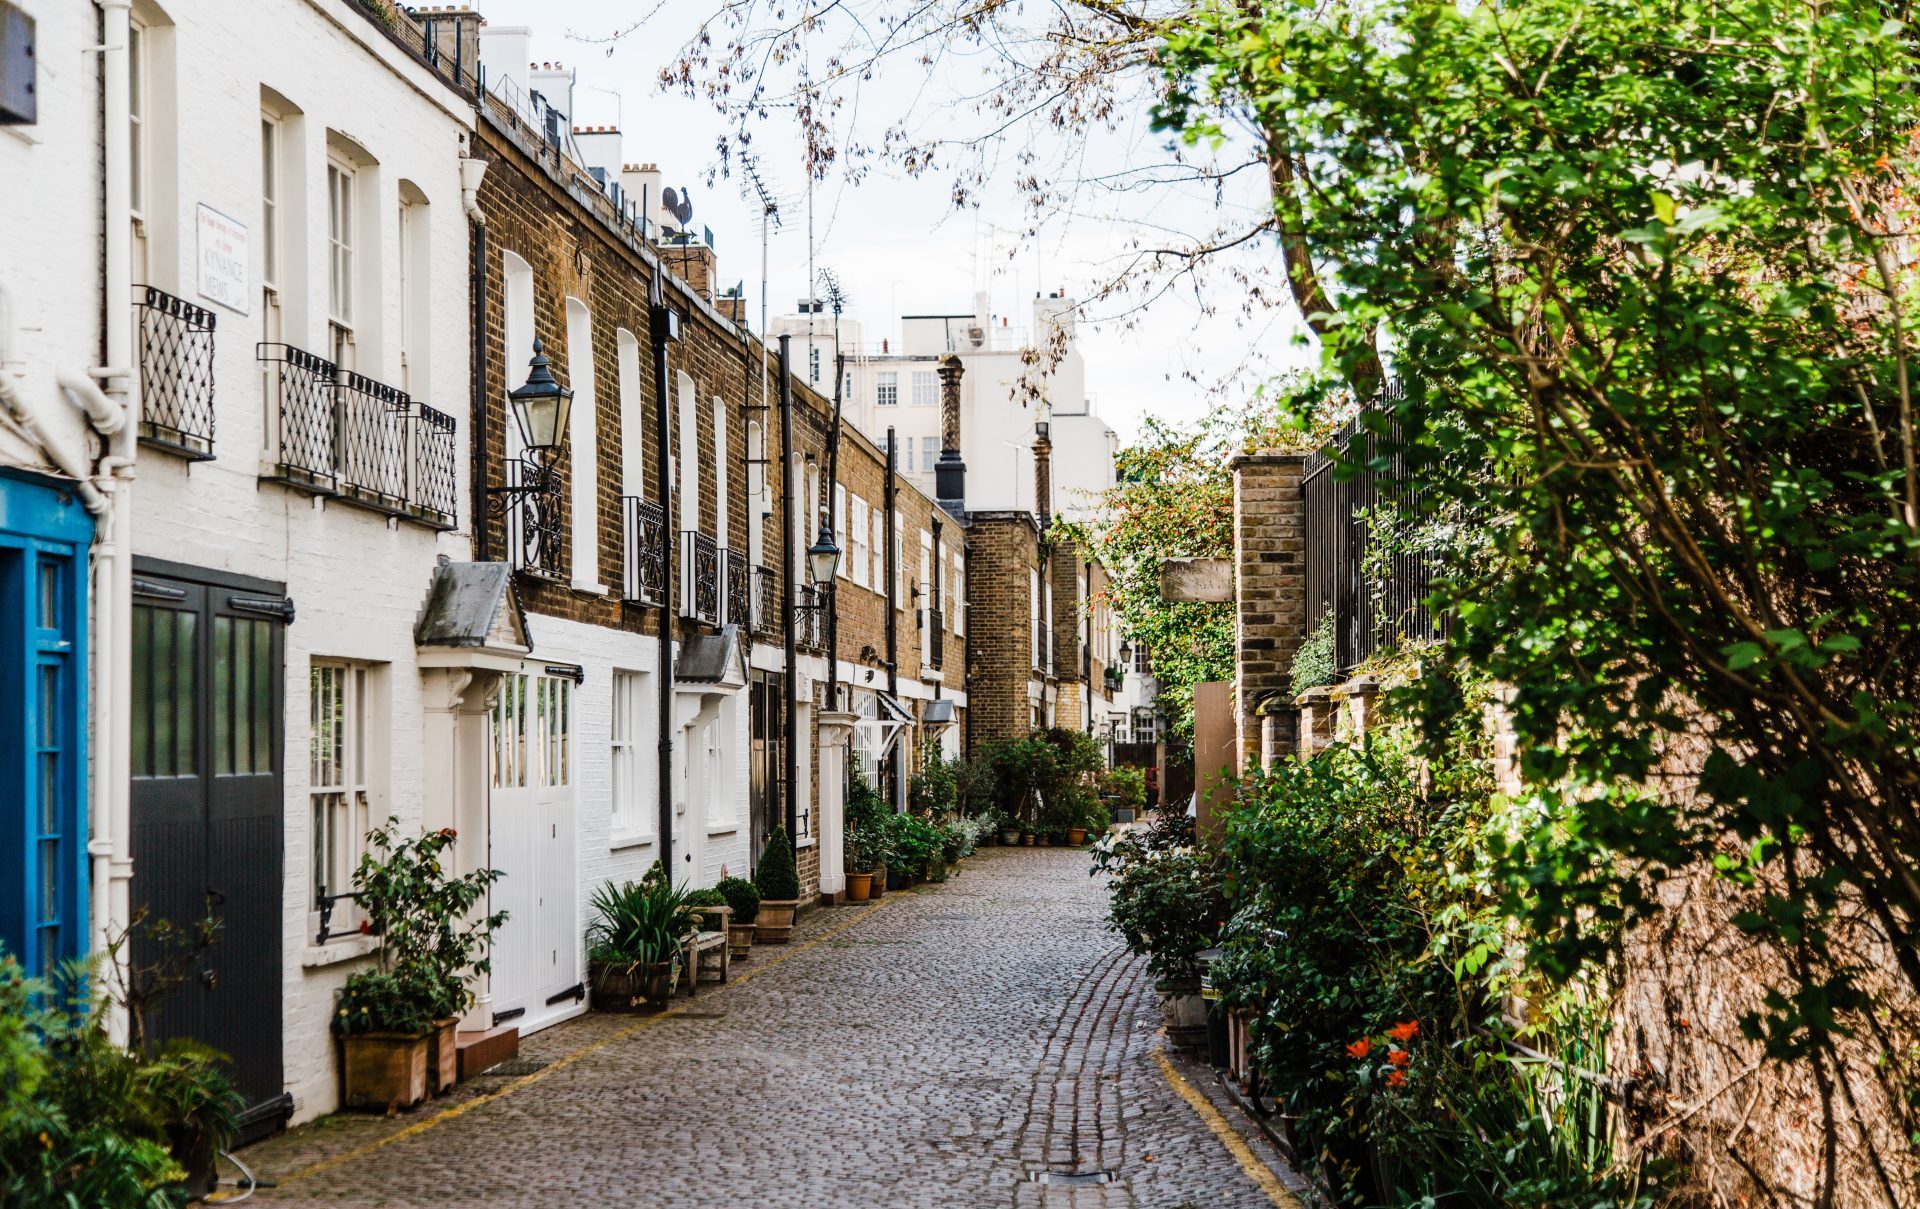 London's rental market is being flooded by bargain Airbnb listings